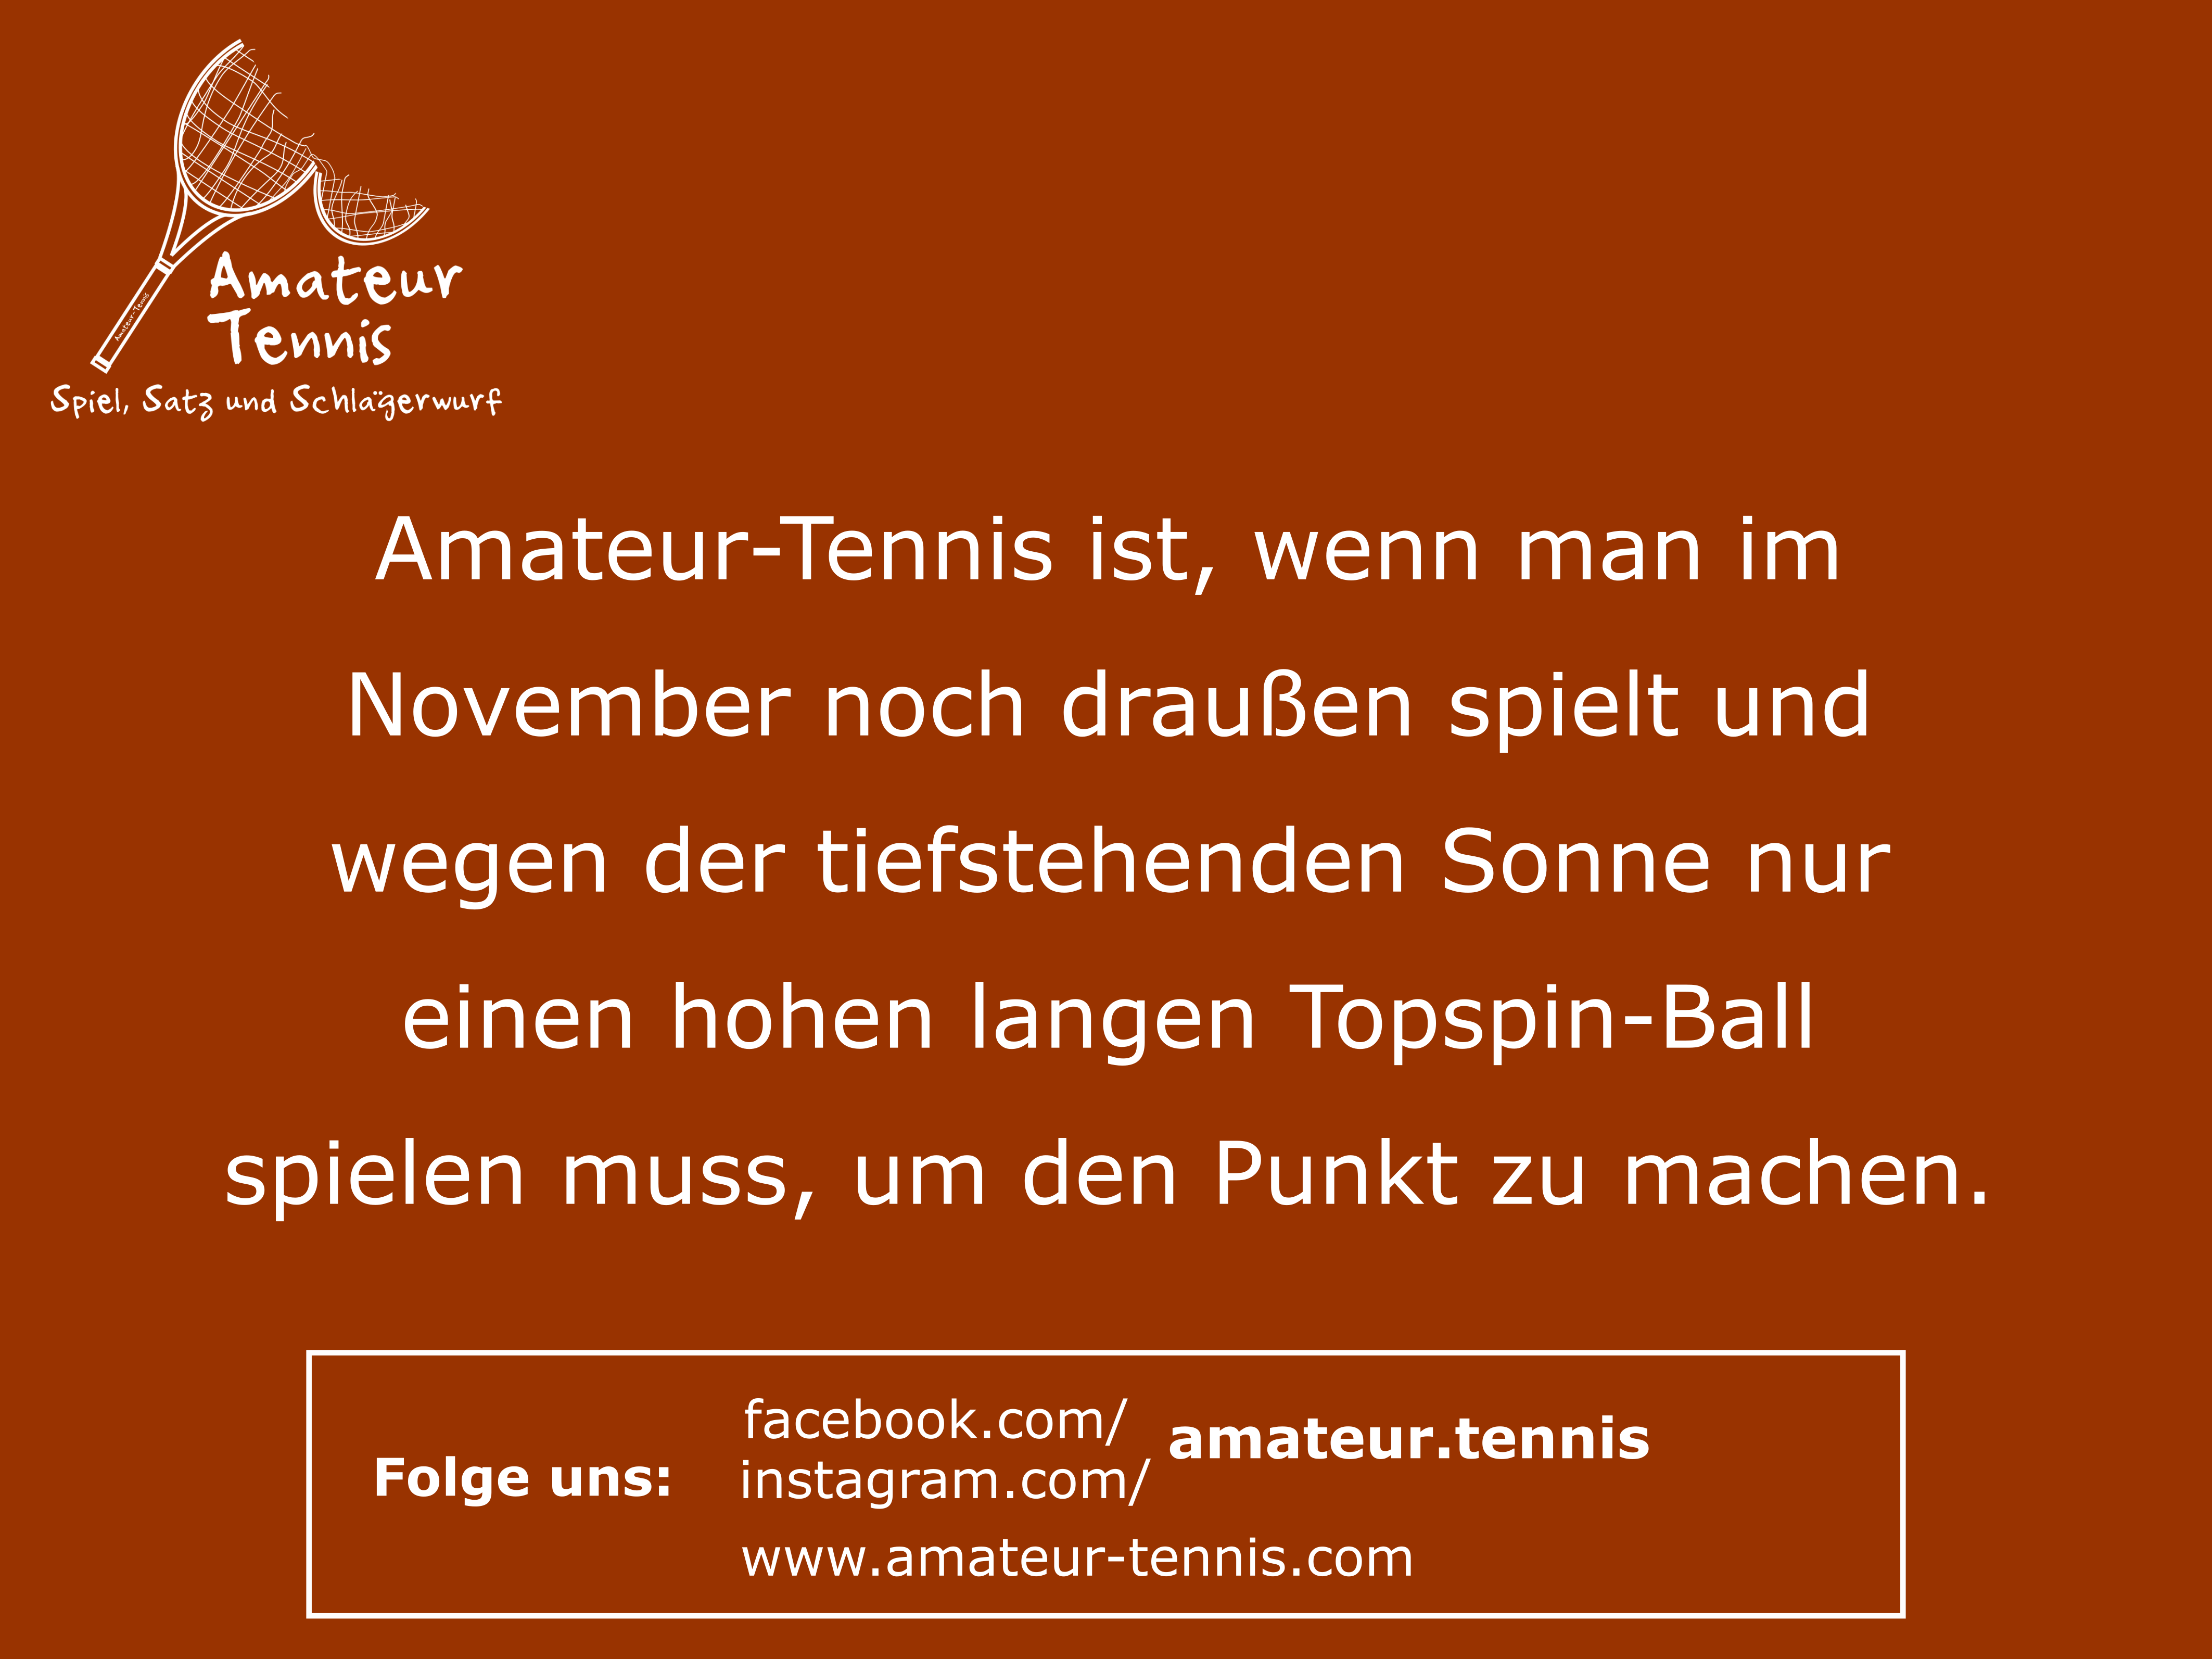 Topspin-Ball